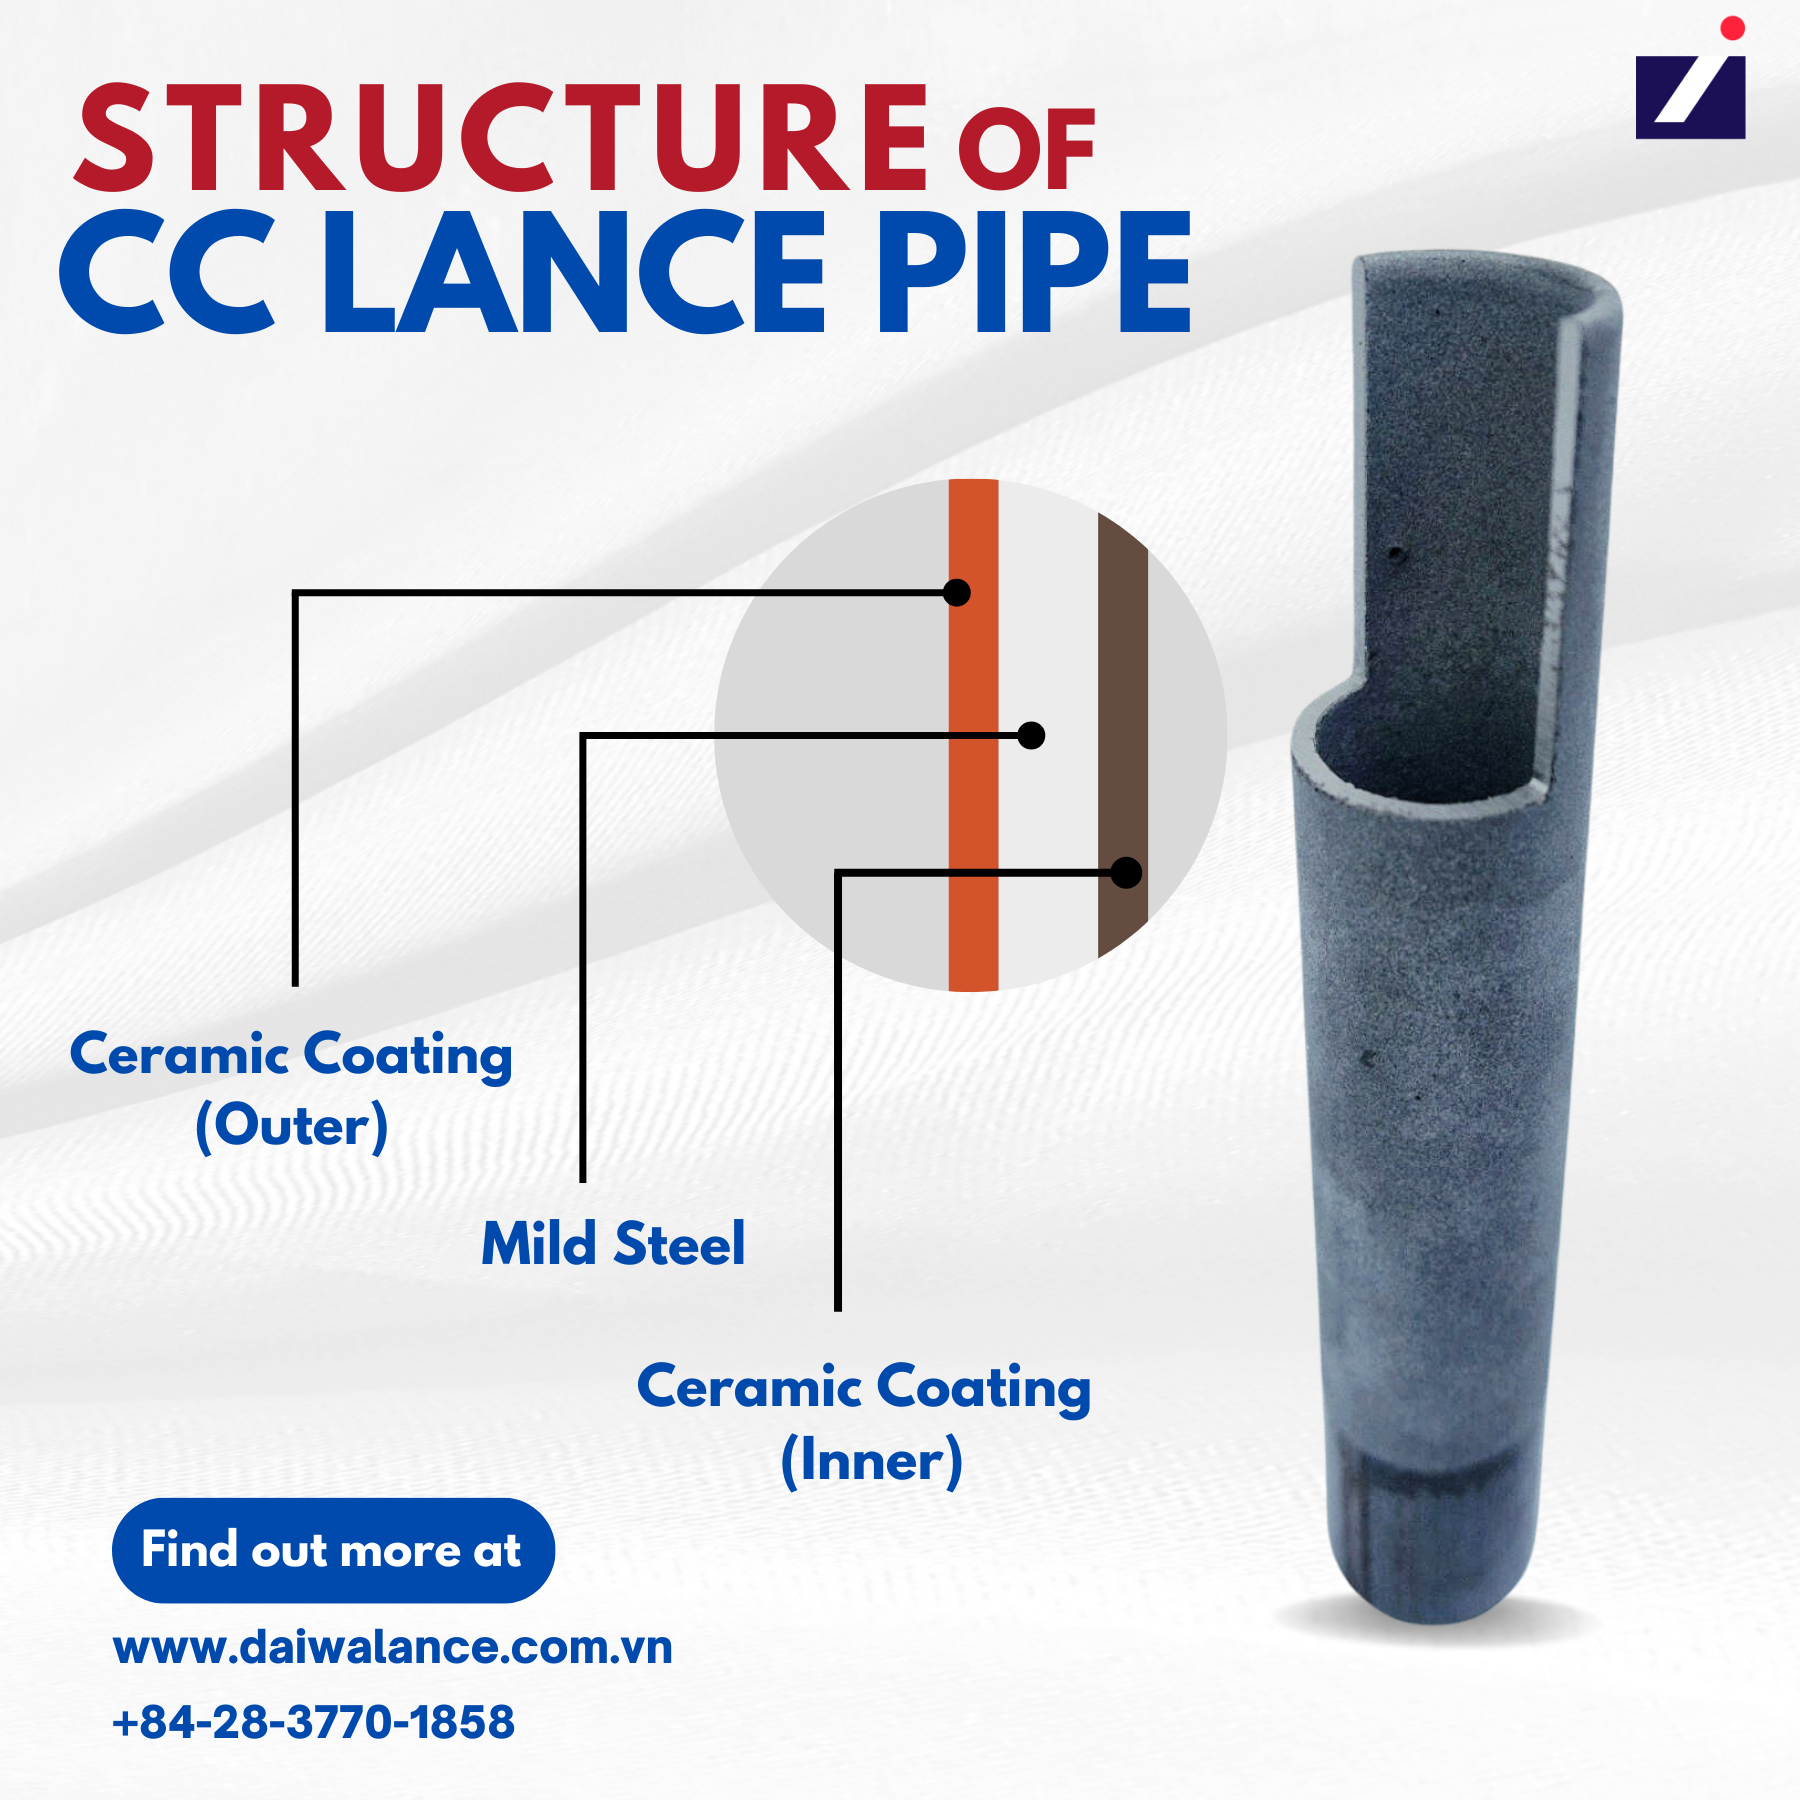 More About Structure and Size of CC Lance Pipe